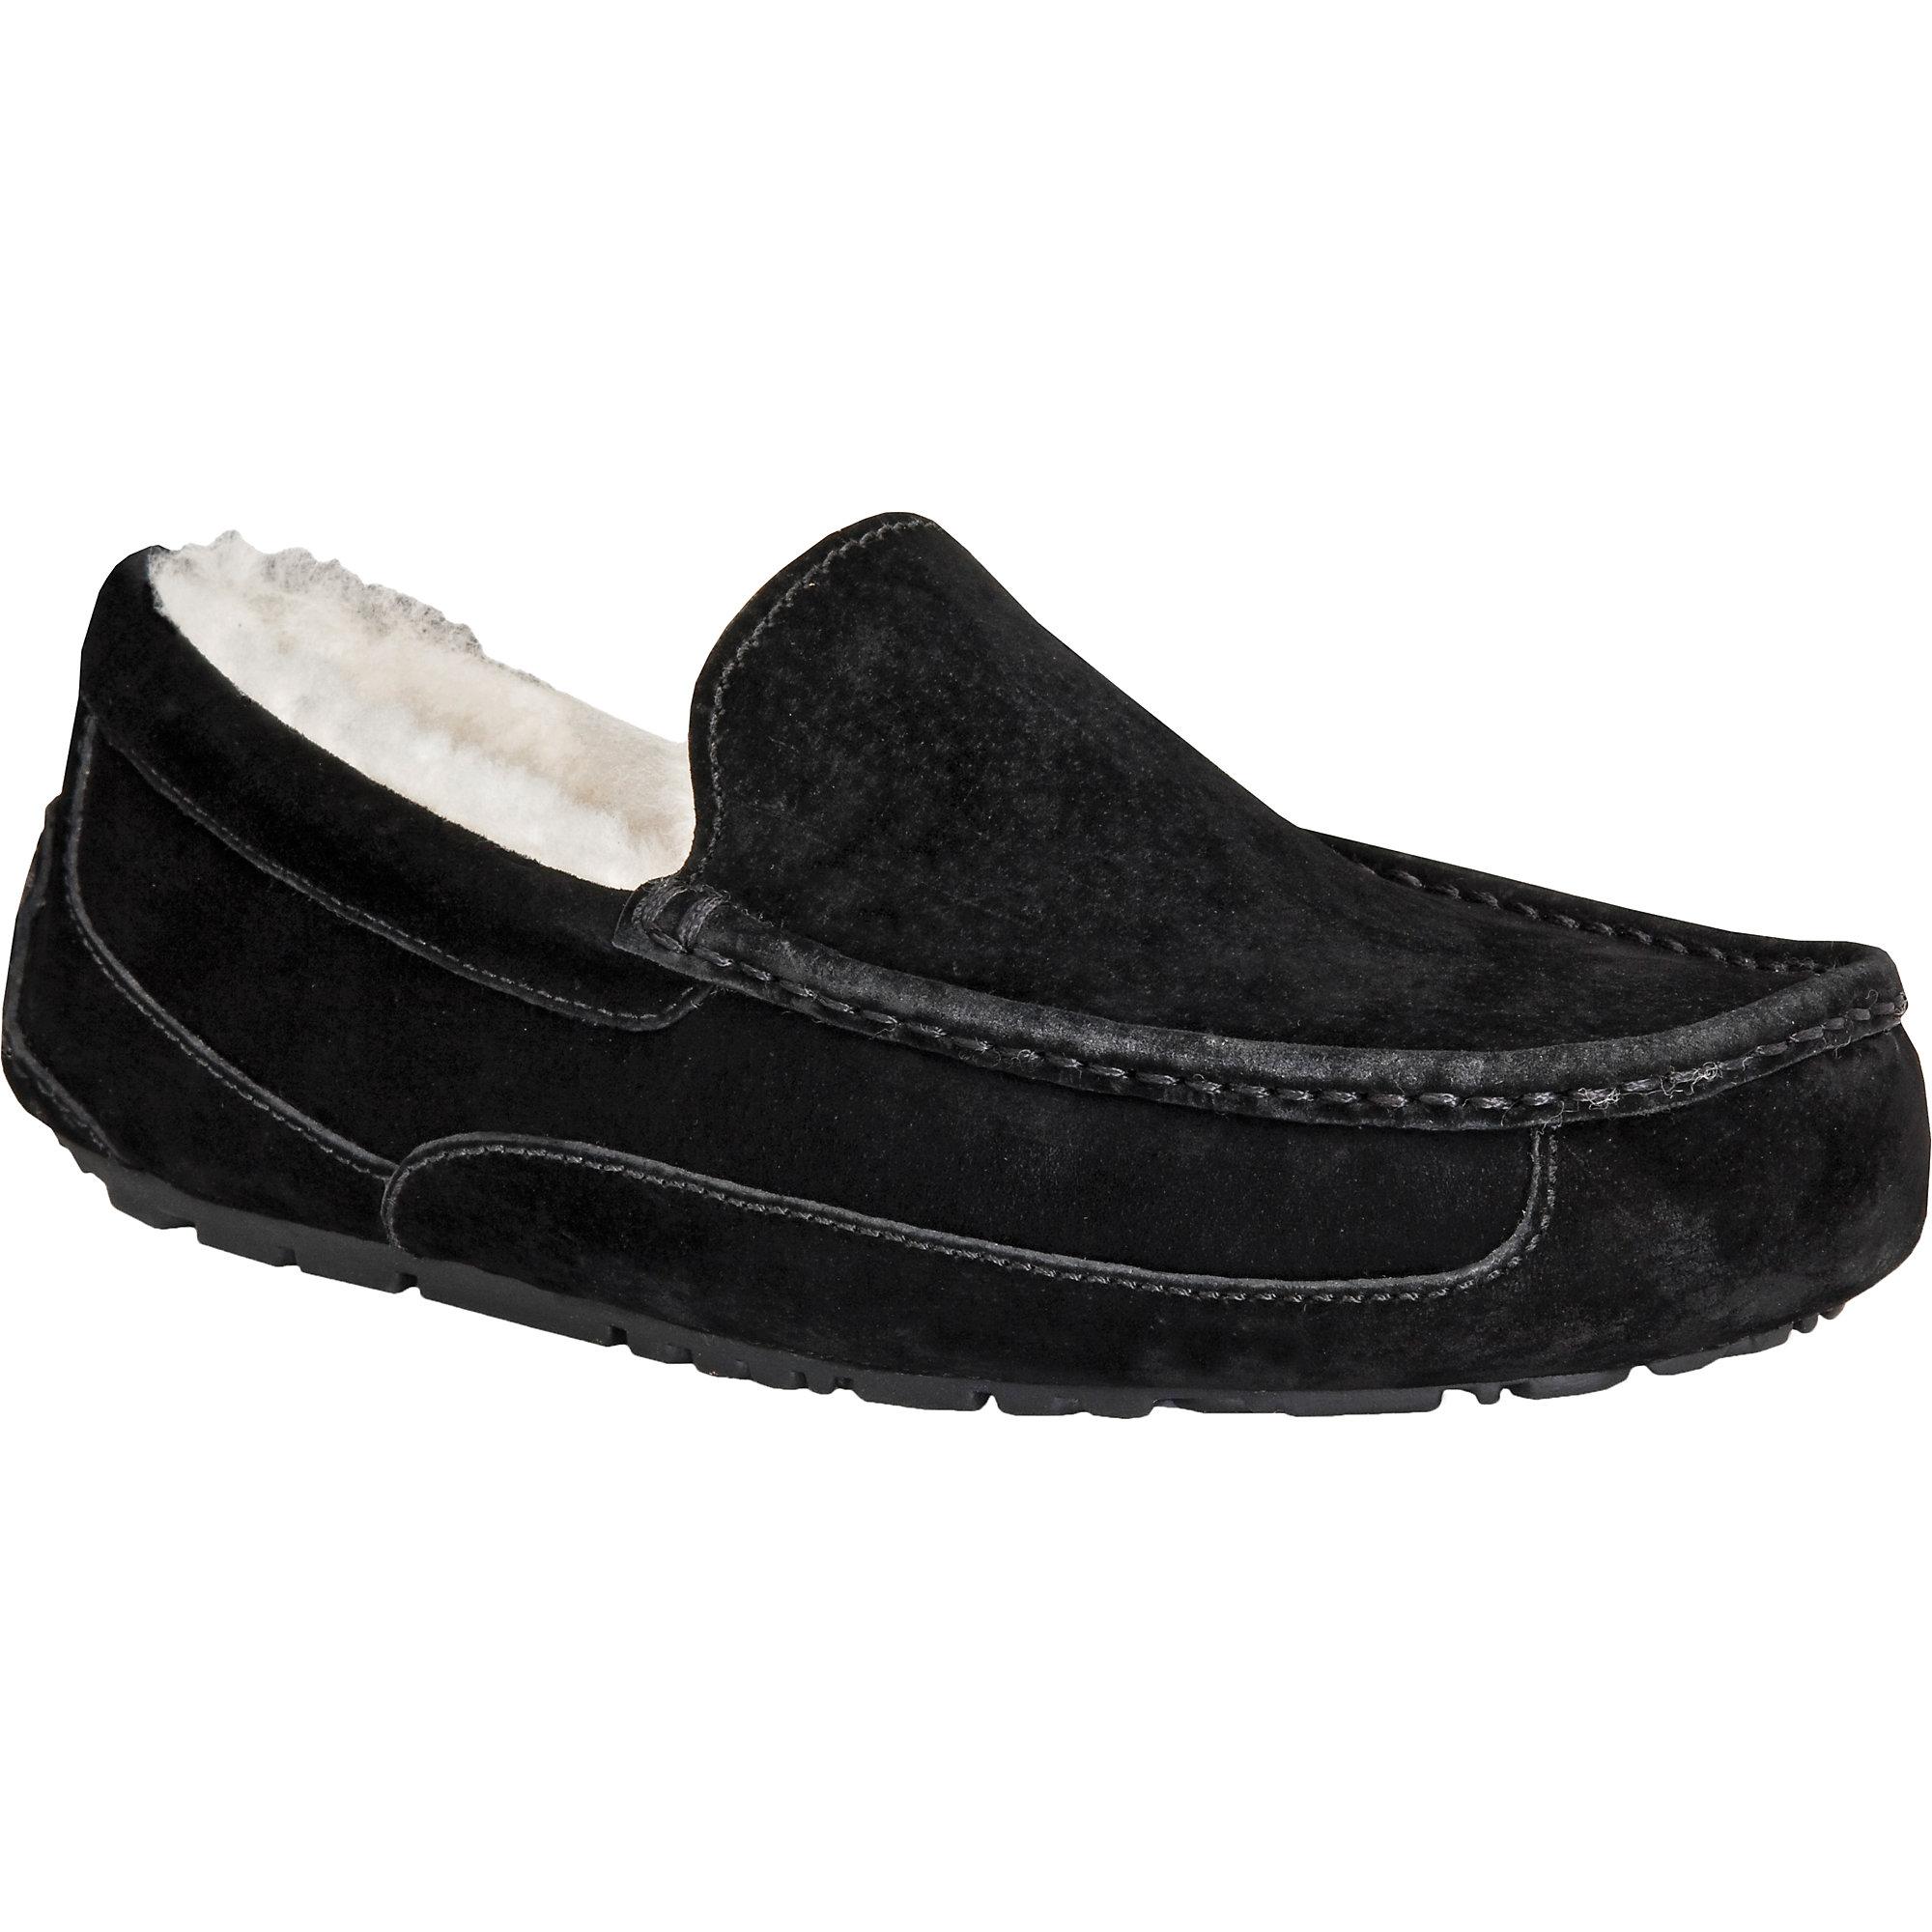 UGG Ascot Suede Slipper in Black for Men - Save 5% - Lyst